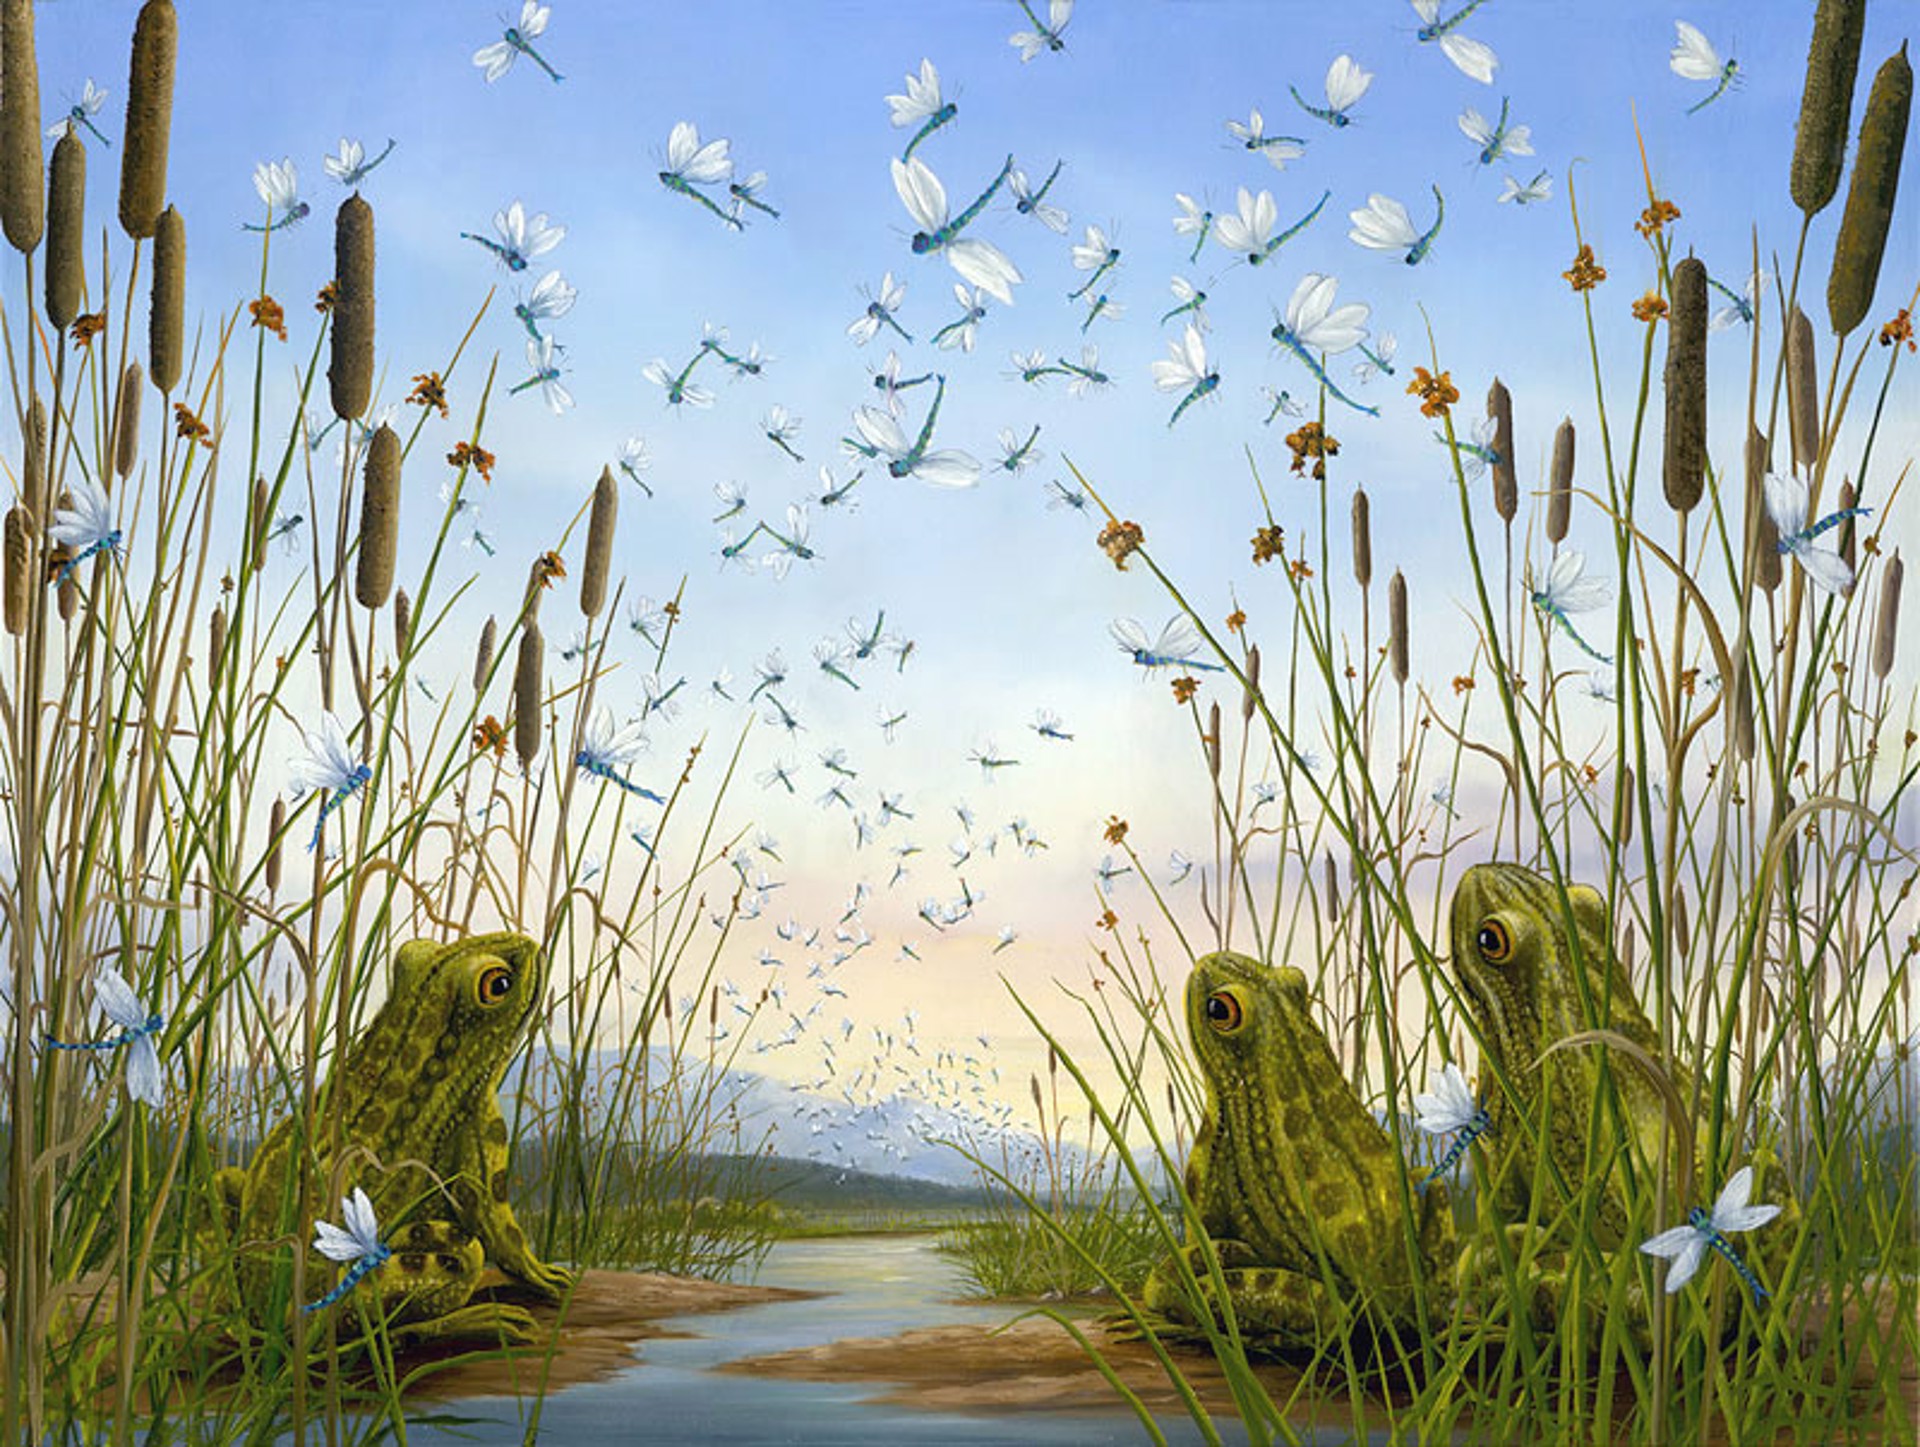 The Flight - SOLD OUT ON ALL EDITIONS by Robert Bissell